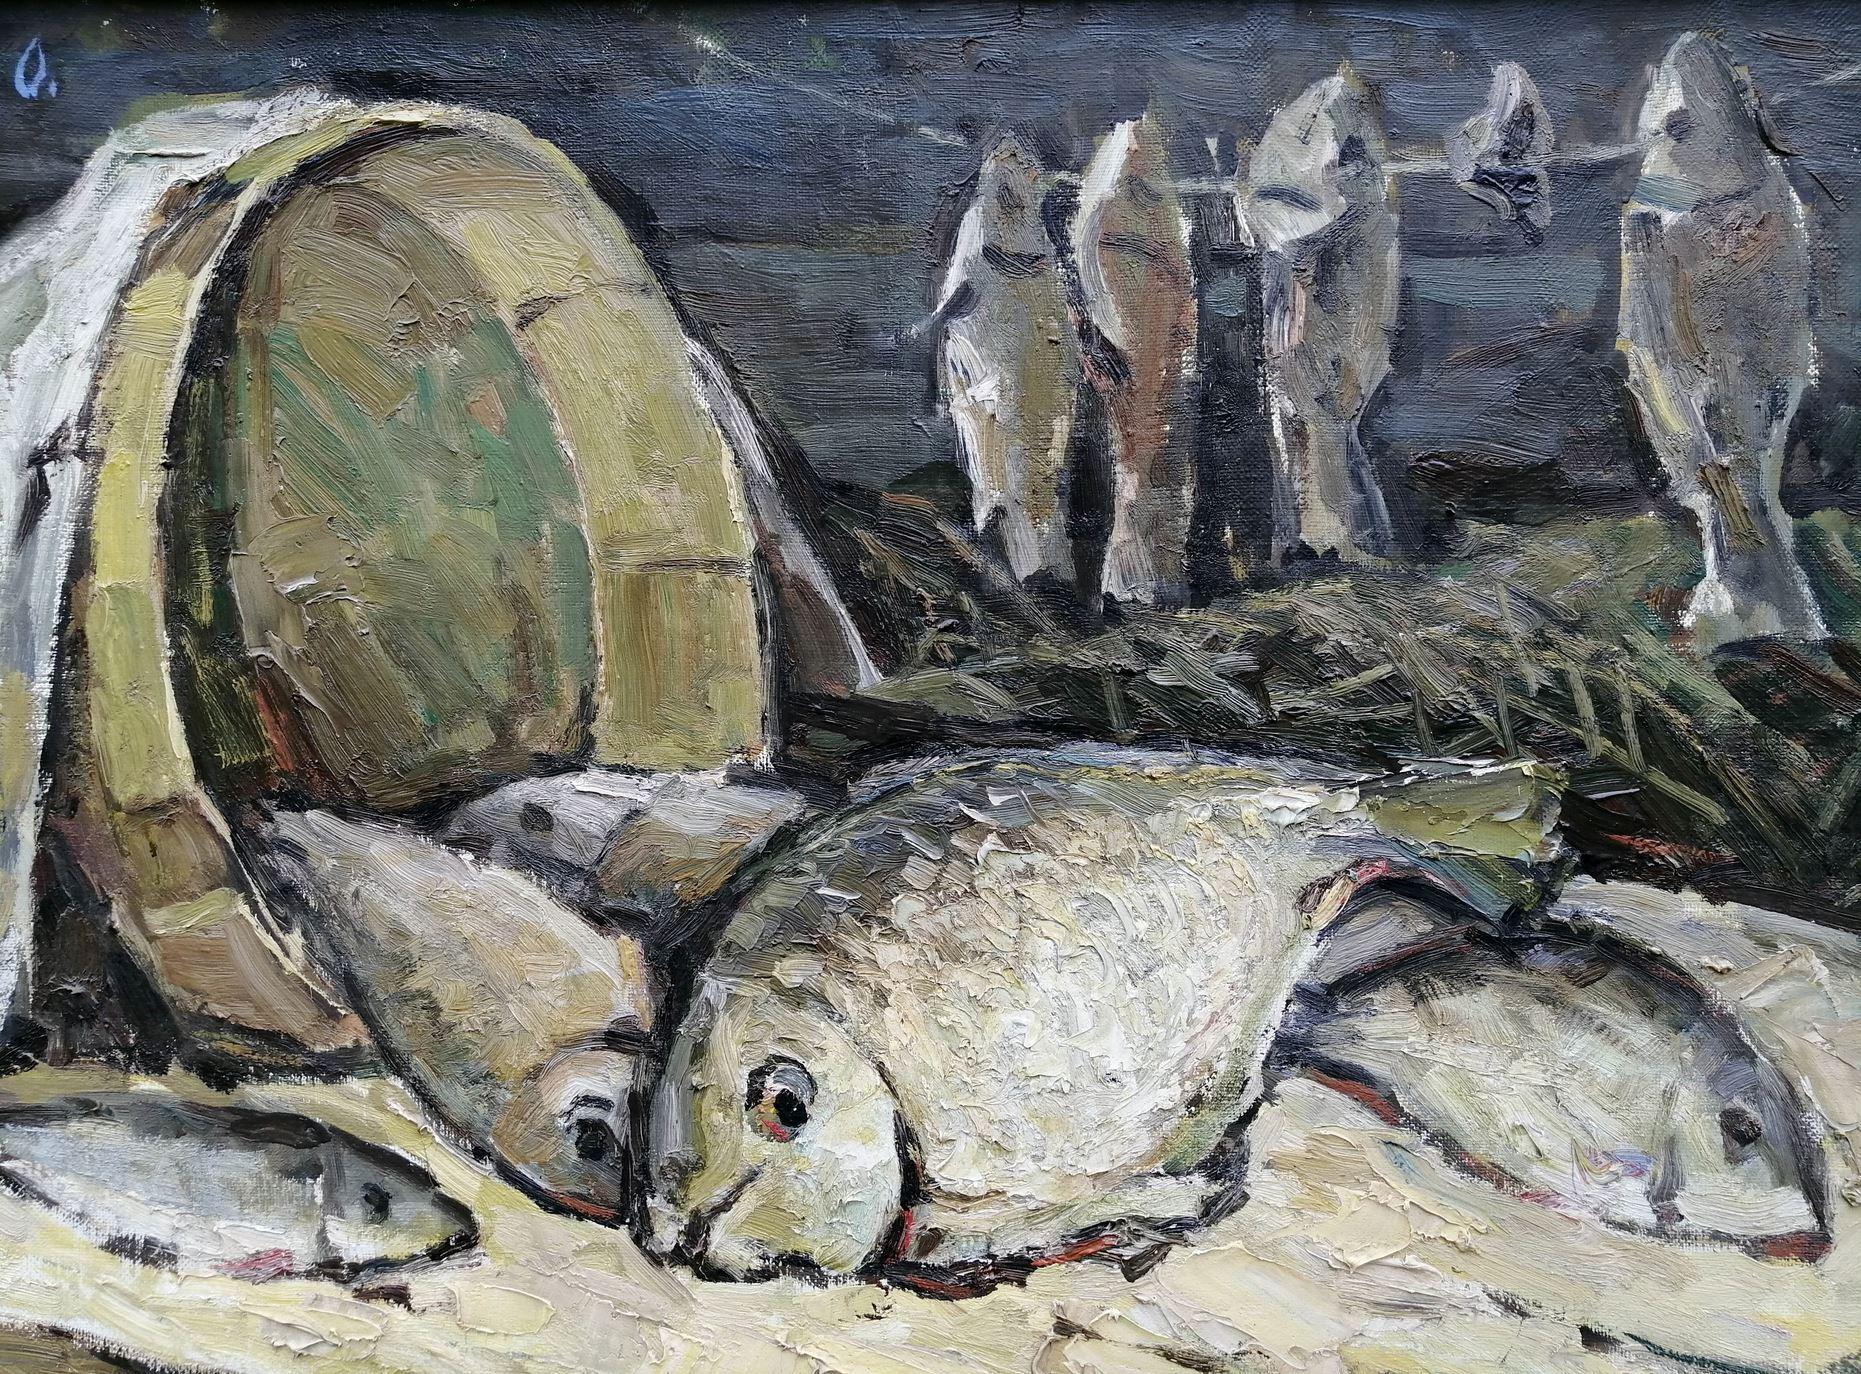 Artist: Alex Kalenyuk 
Work: Original oil painting, handmade artwork, one of a kind 
Medium: Oil on canvas 
Year: 2006
Style: Impressionism
Title: Fish on the Table, 
Size: 23.5